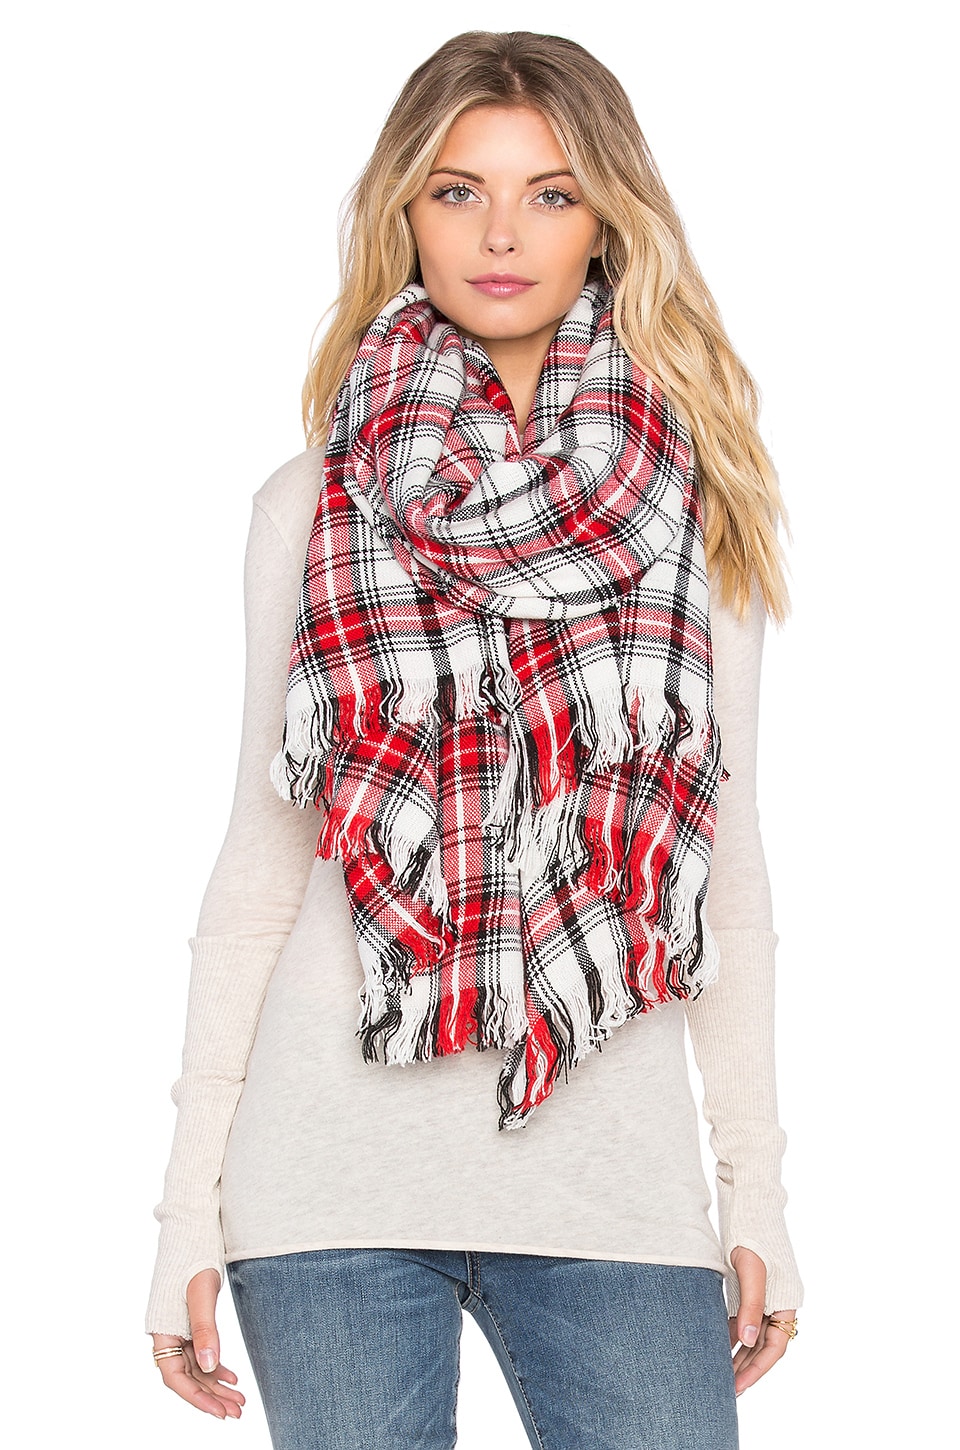 Love this checkered scarf